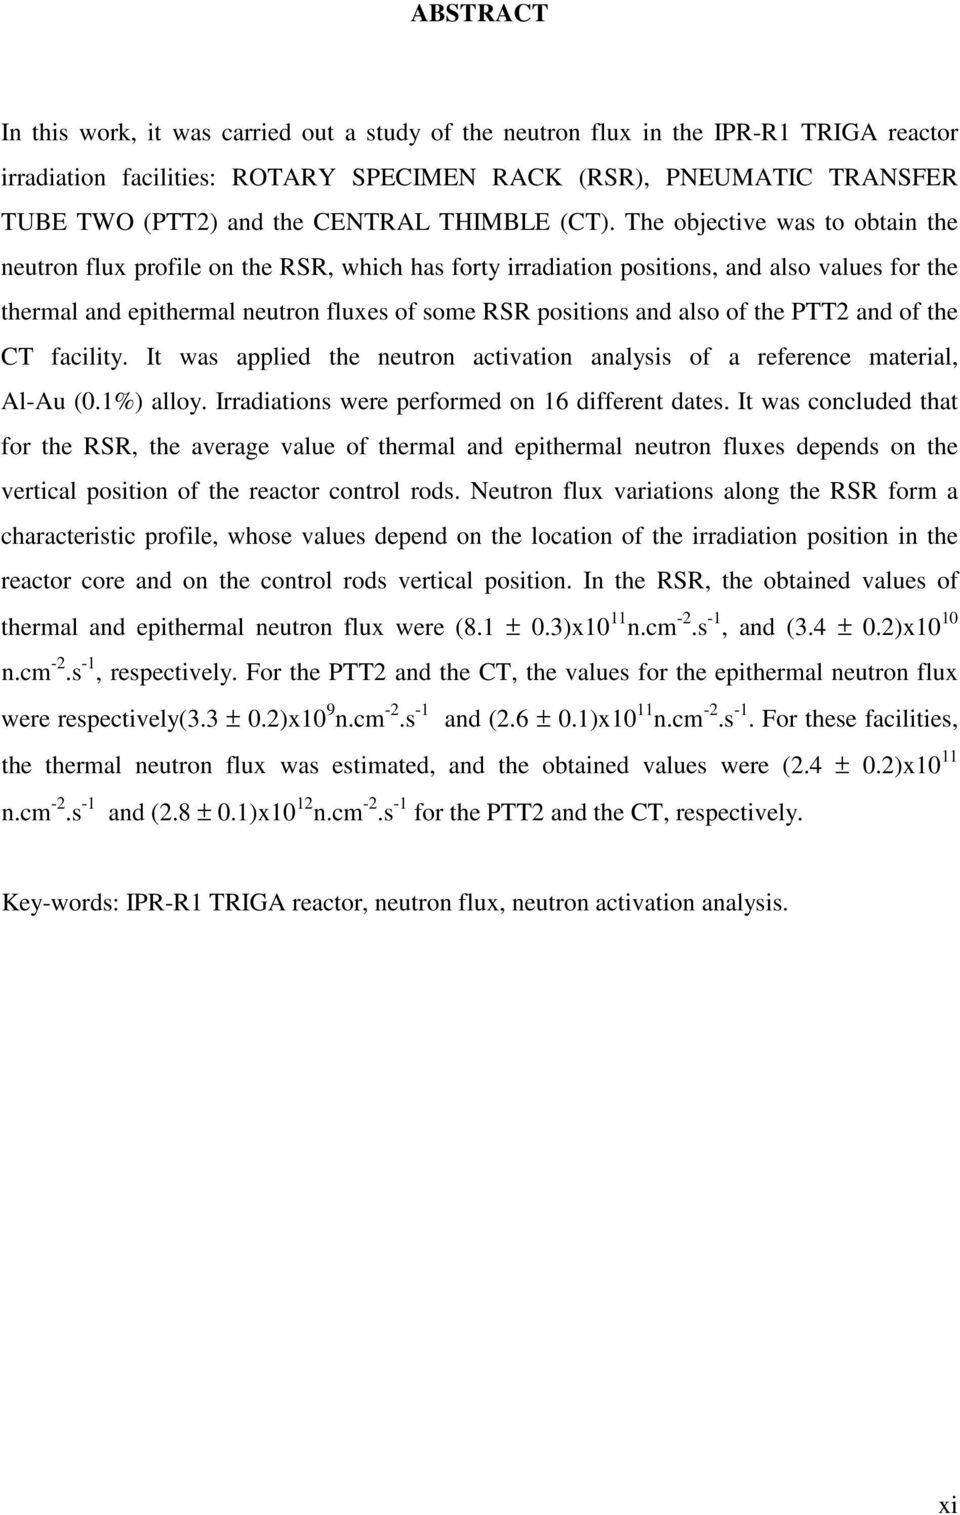 The objective was to obtain the neutron flux profile on the RSR, which has forty irradiation positions, and also values for the thermal and epithermal neutron fluxes of some RSR positions and also of